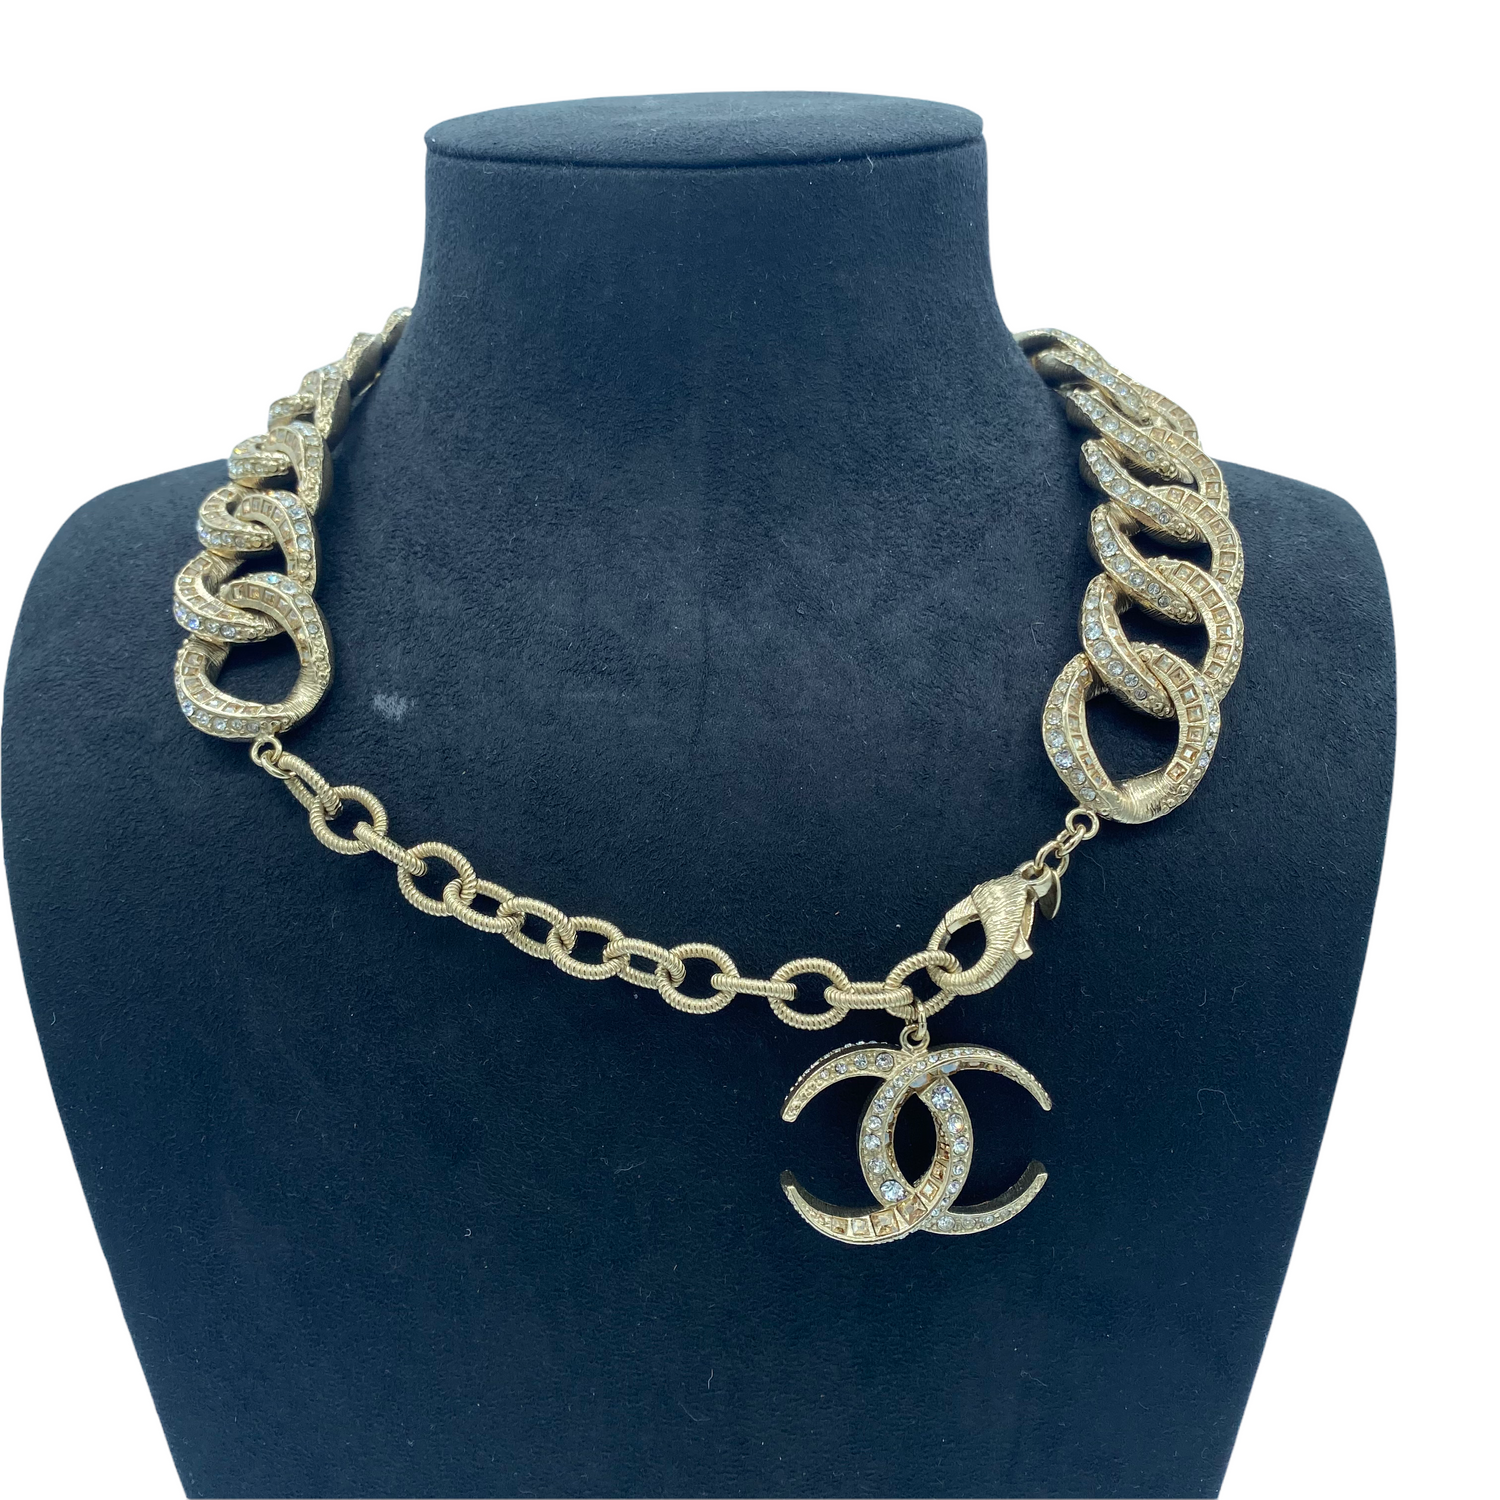 Lysis vintage Chanel chain choker necklace - 2010s